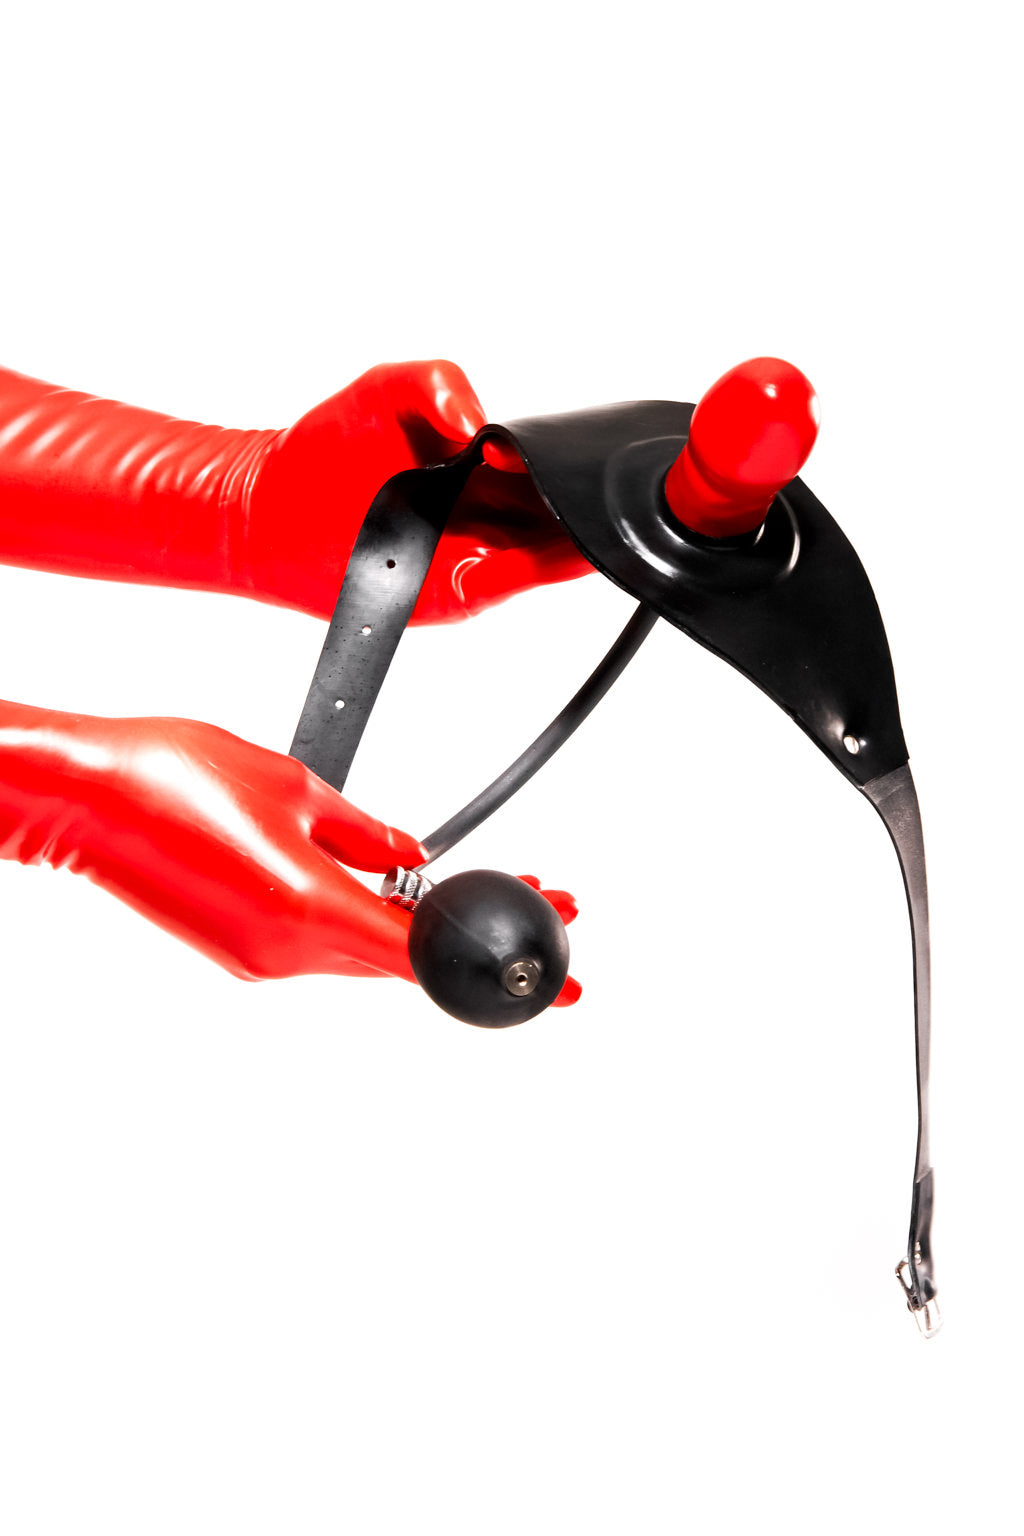 Red latex gloves holding an inflatable gag on a strap.